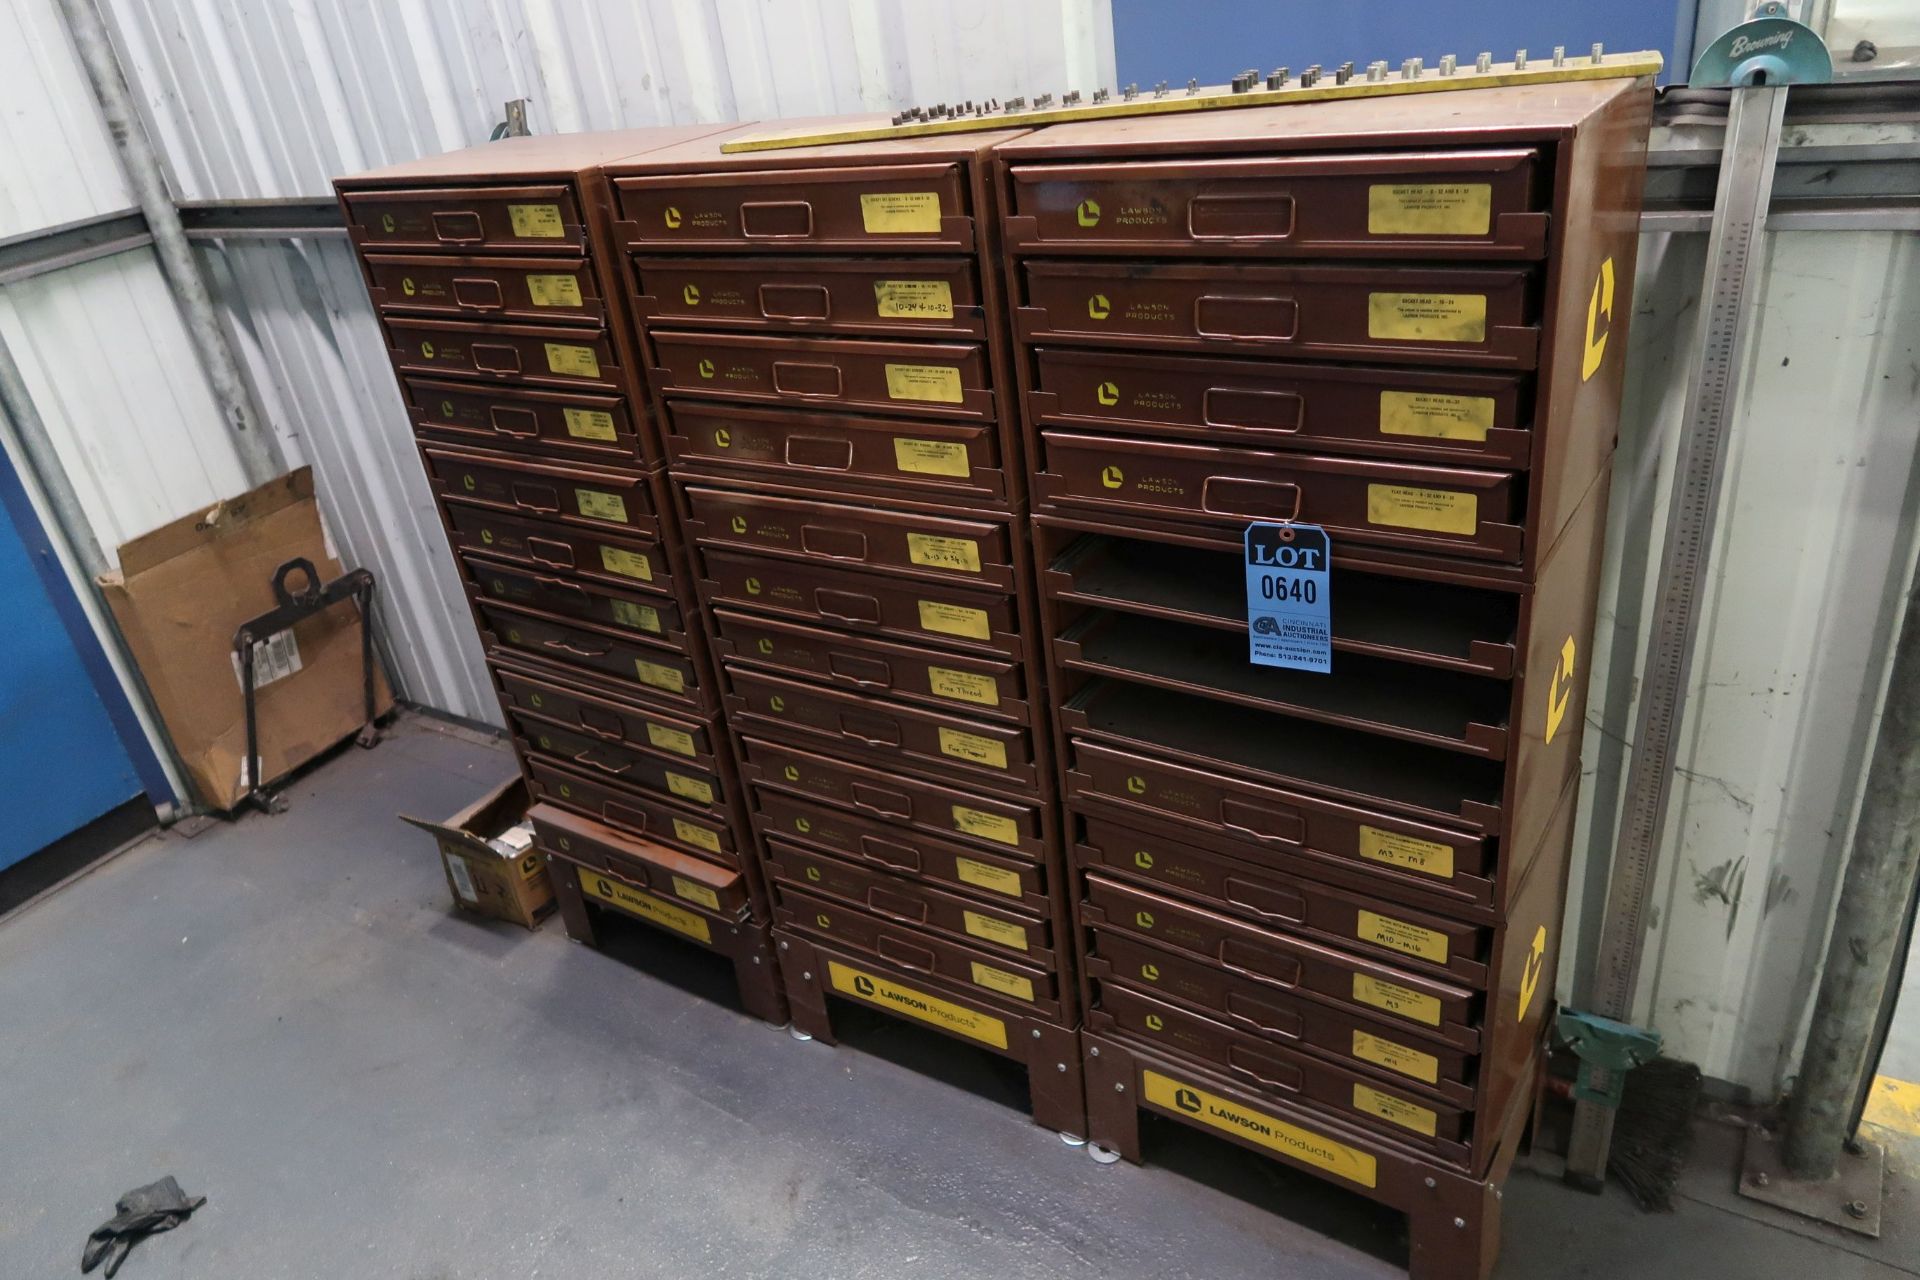 CABINETS WITH HARDWARE **LOADING PRICE DUE TO ERRA - $100.00**